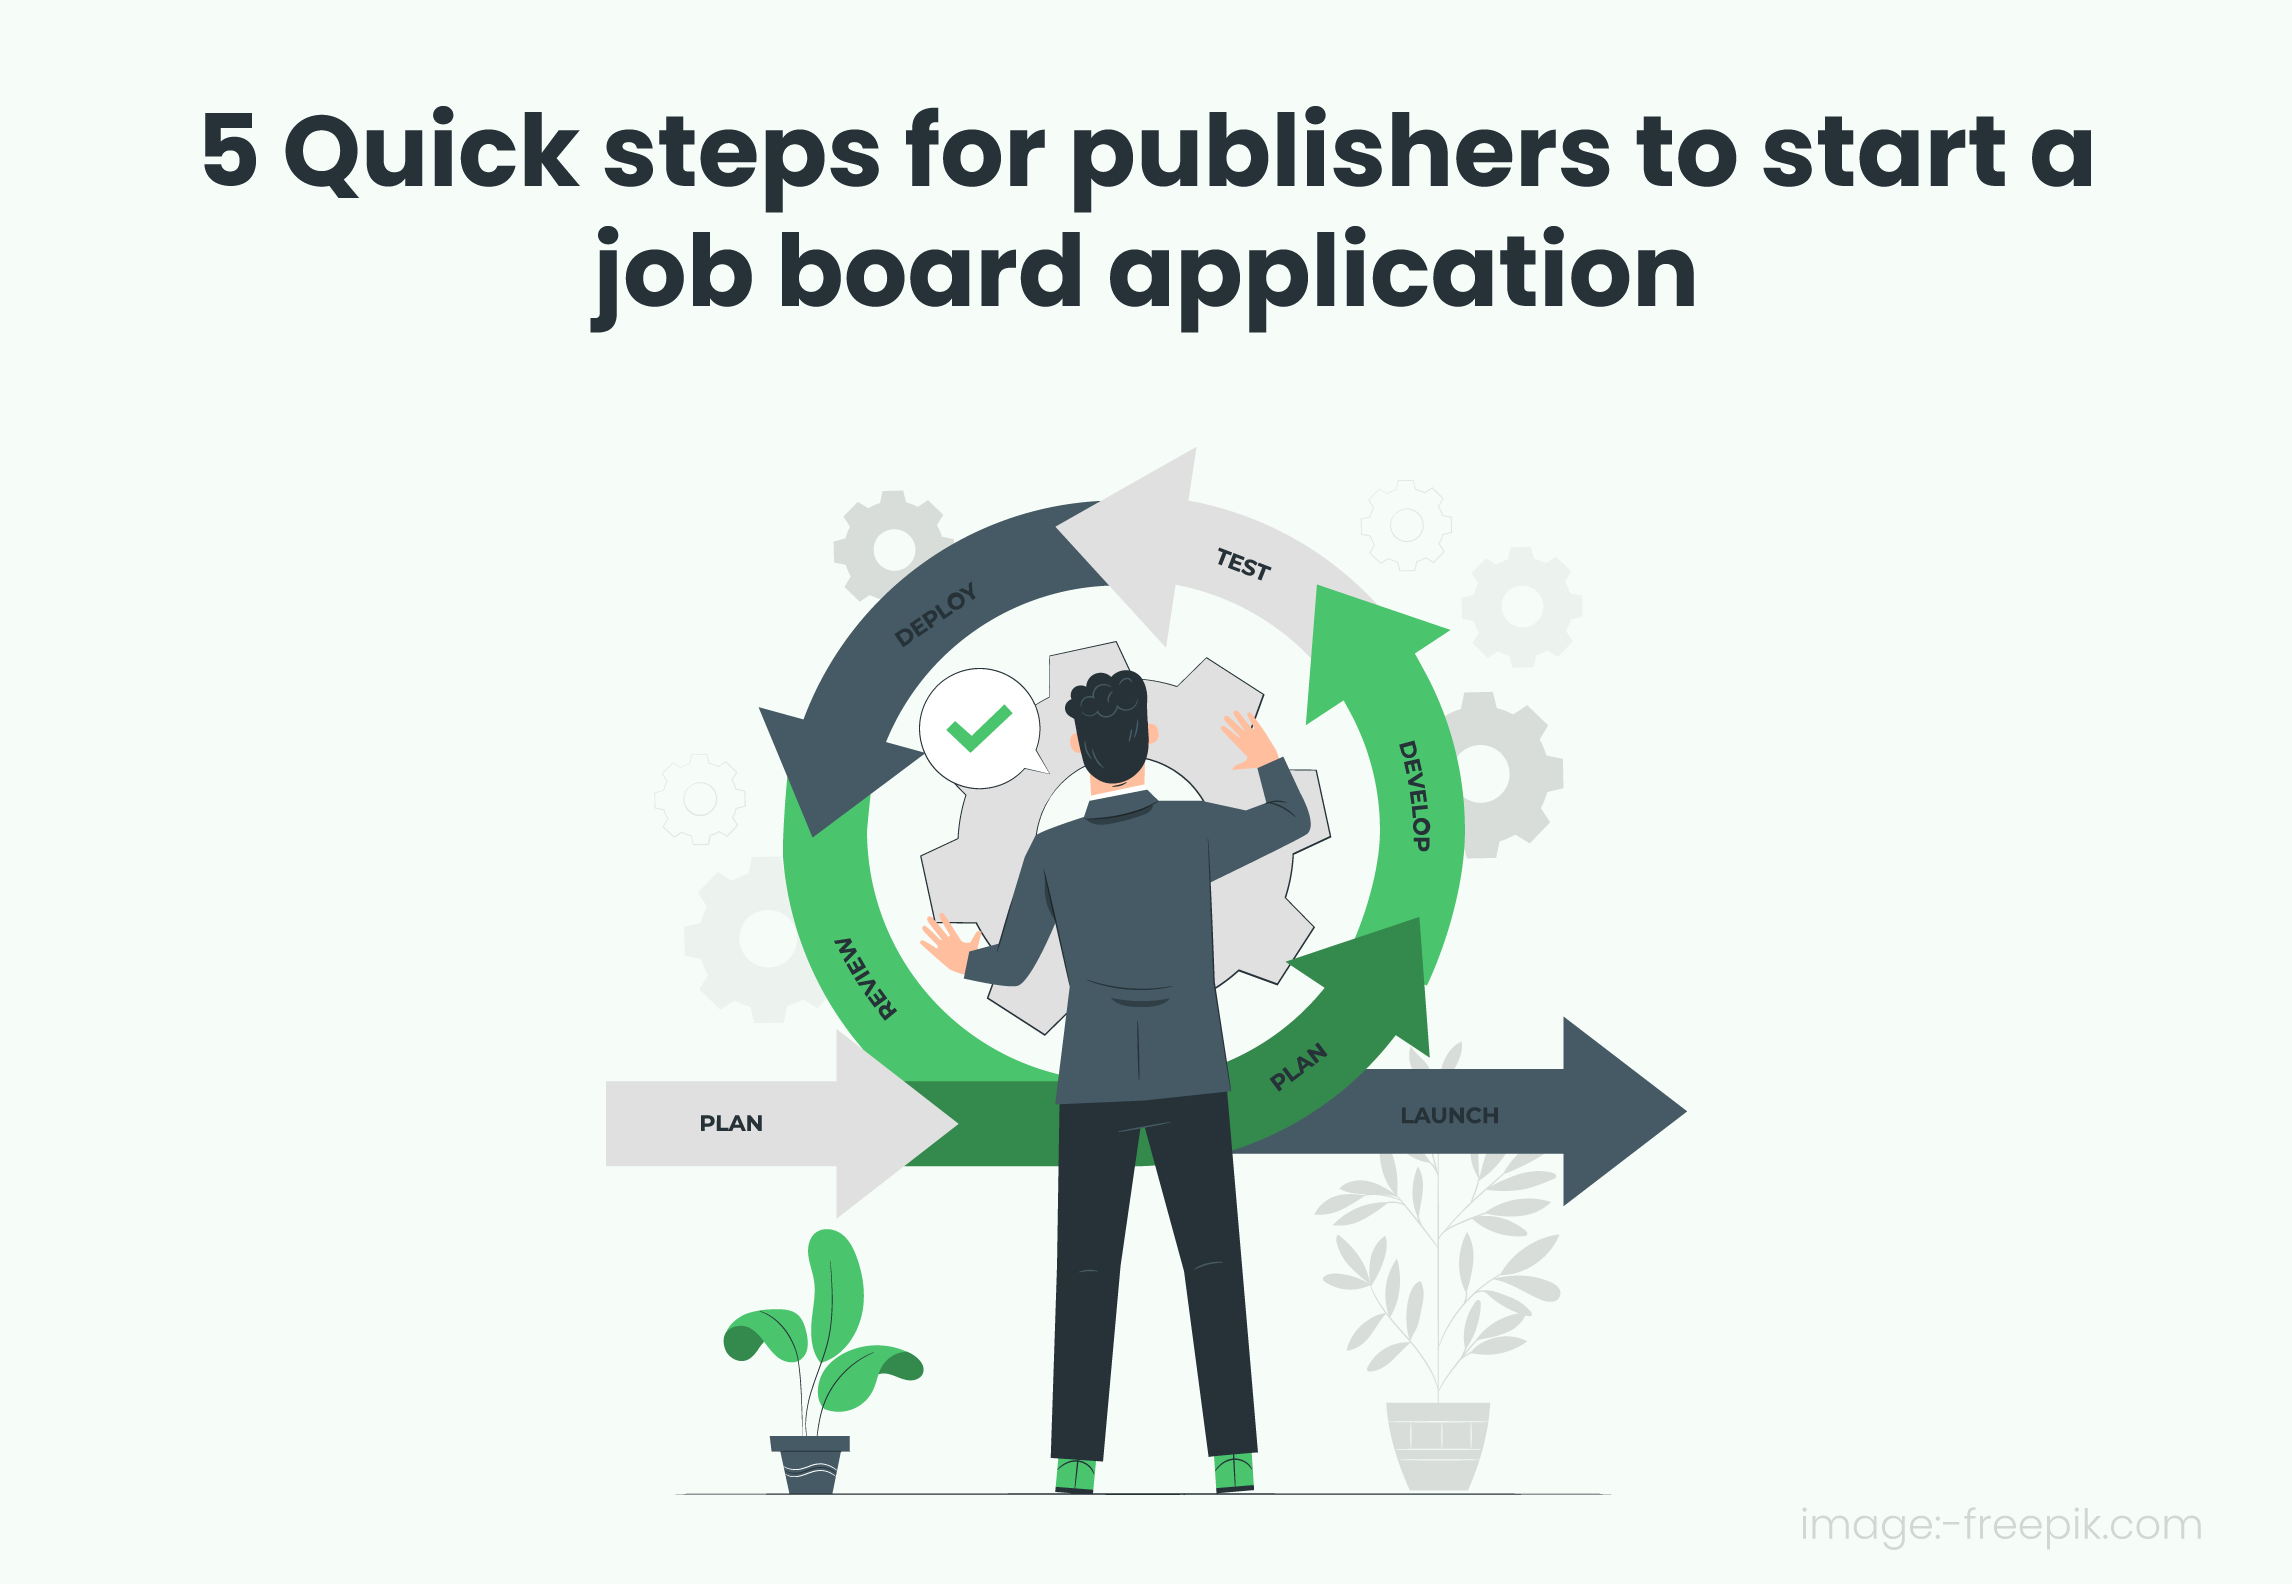 5 Quick steps for publishers to start a job board application